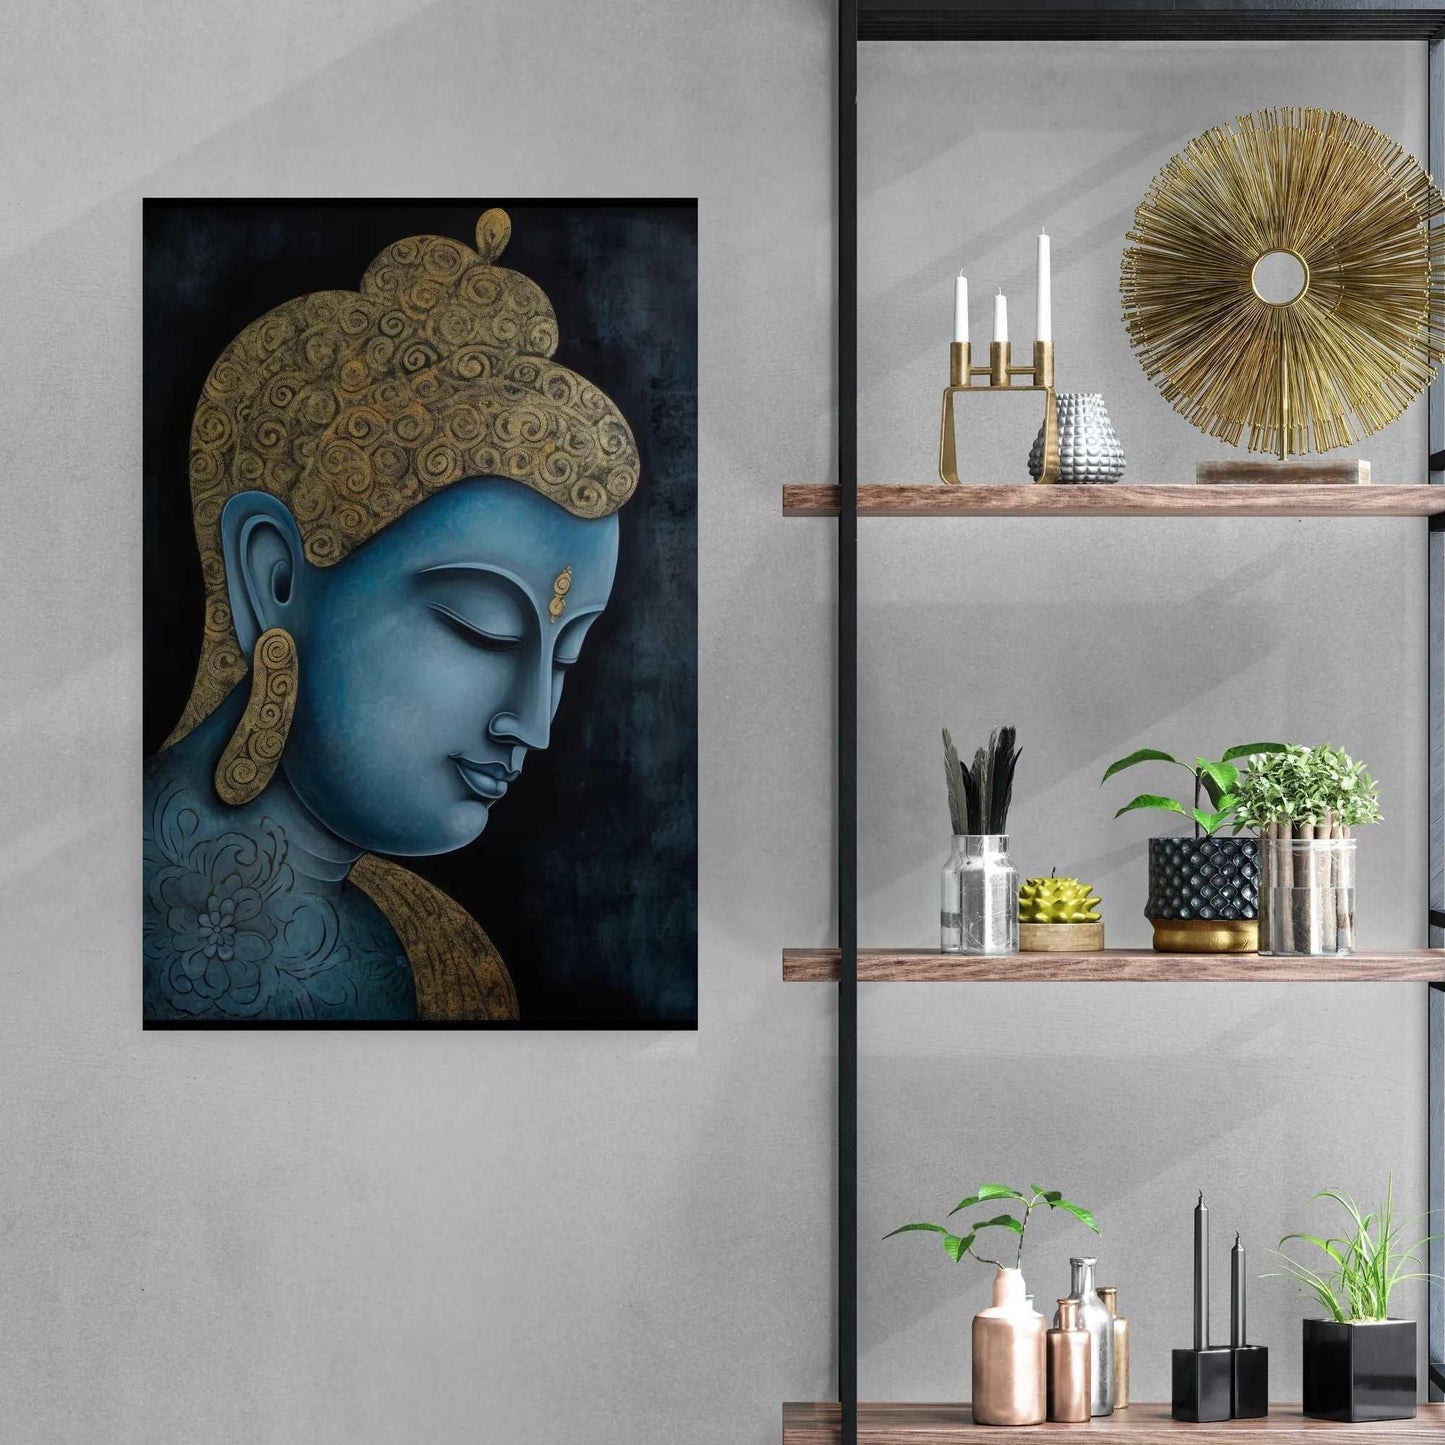 Contemporary room decor featuring a blue and gold Buddha painting on a dark background, near floating shelves with various decorative objects.